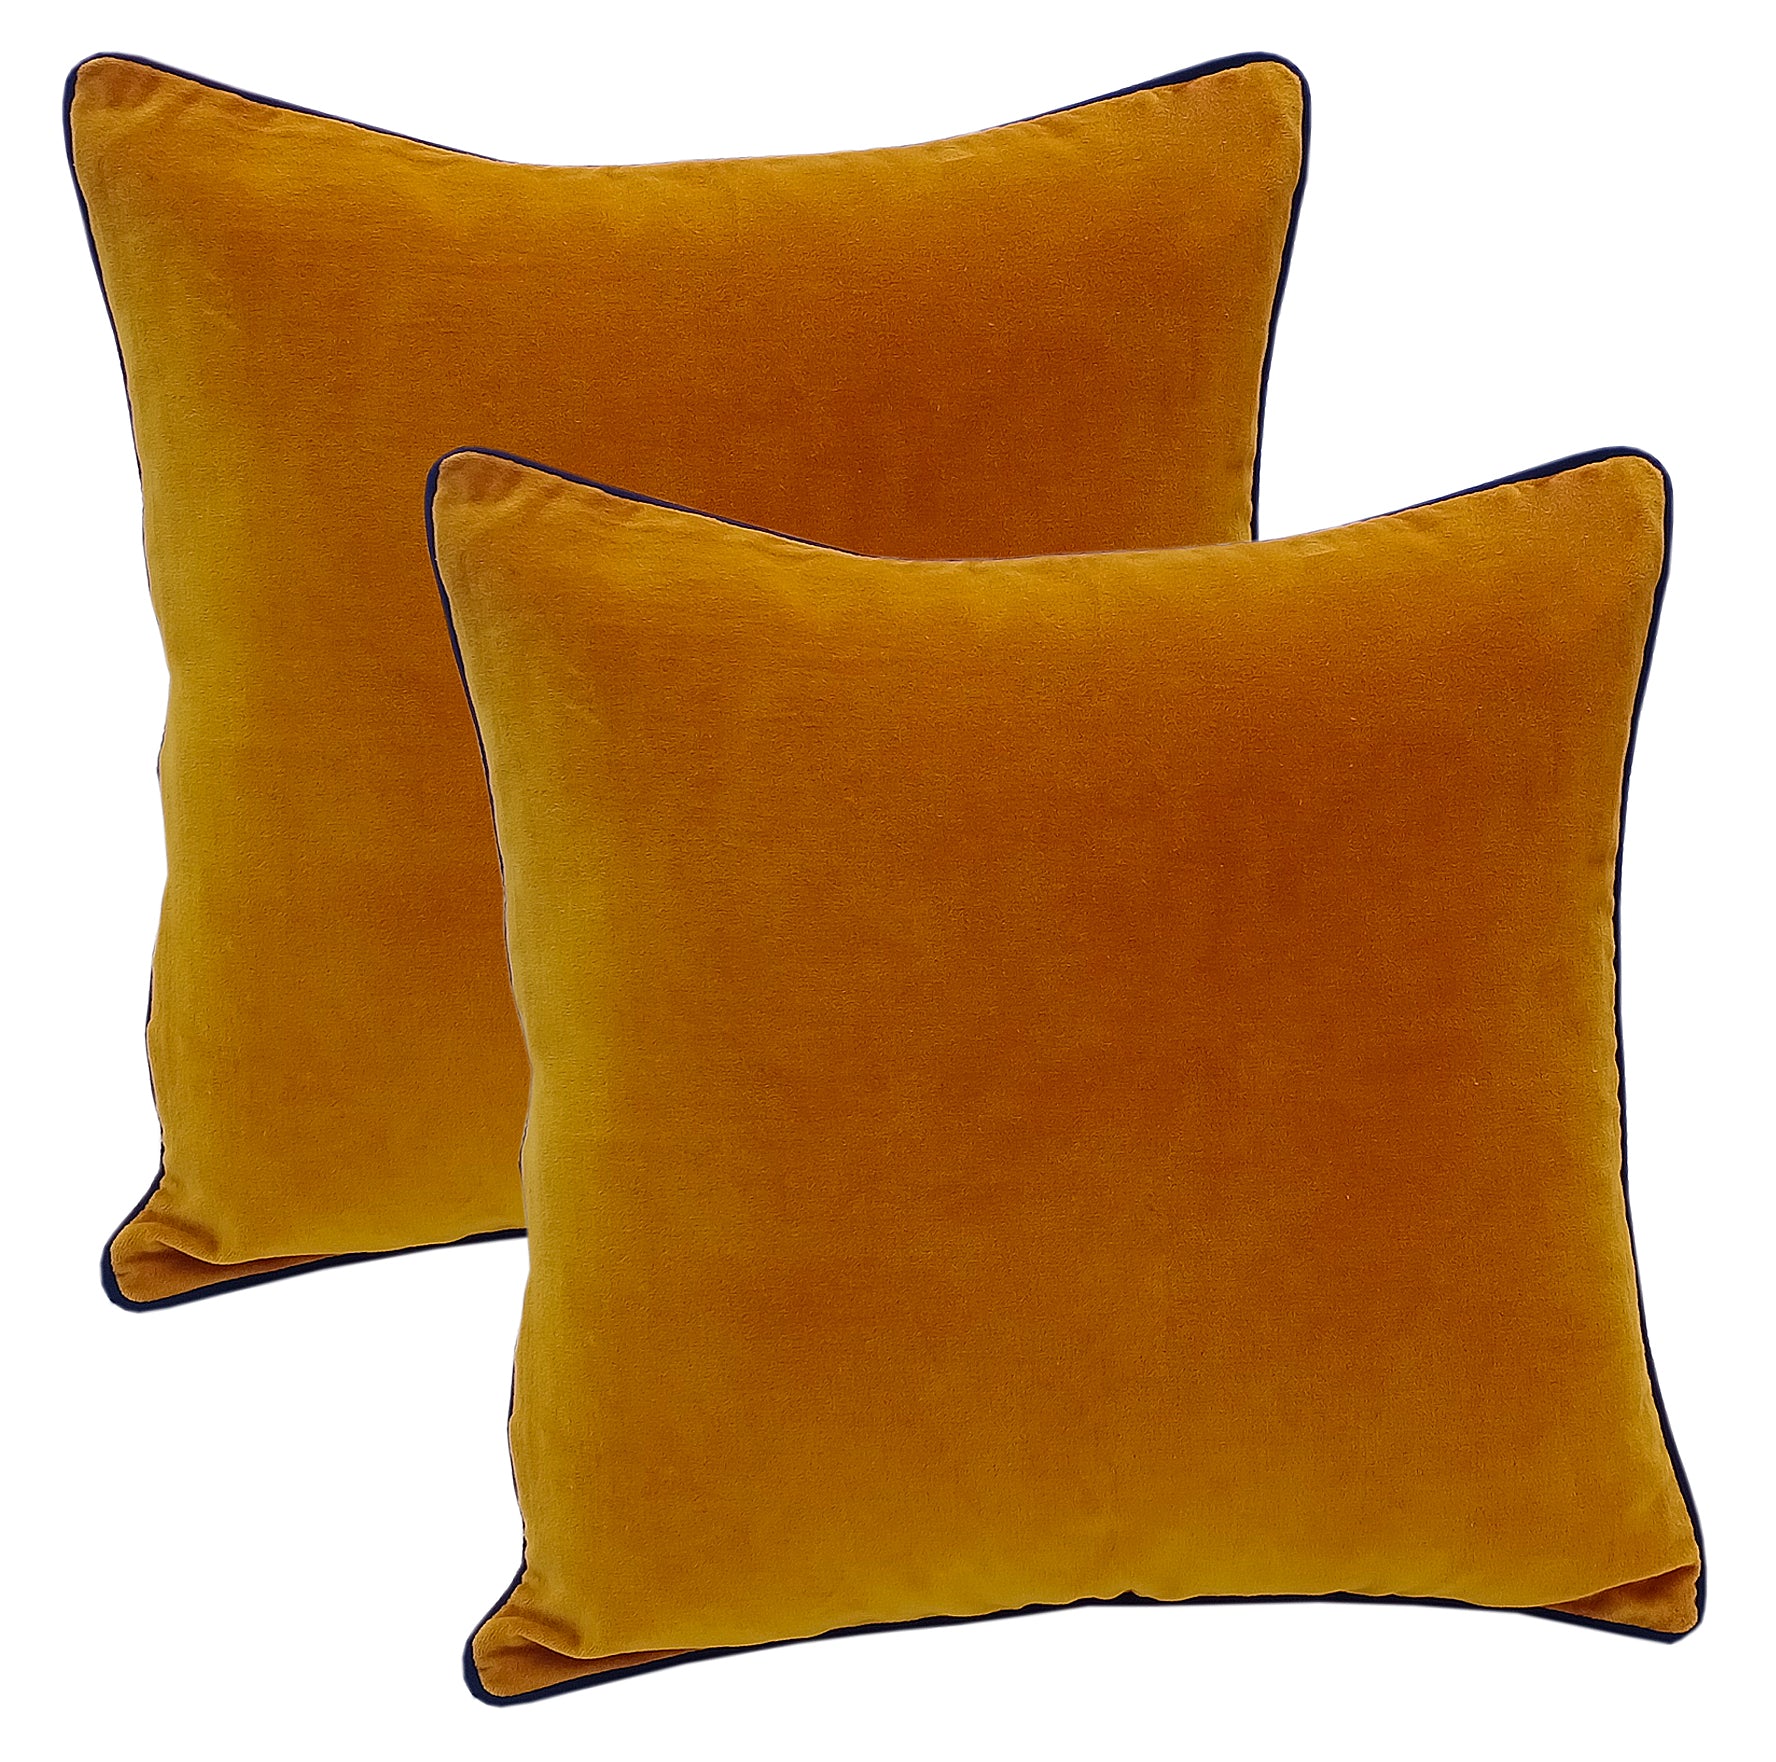 Mustard Velvet Cushion Cover with piping - The Teal Thread